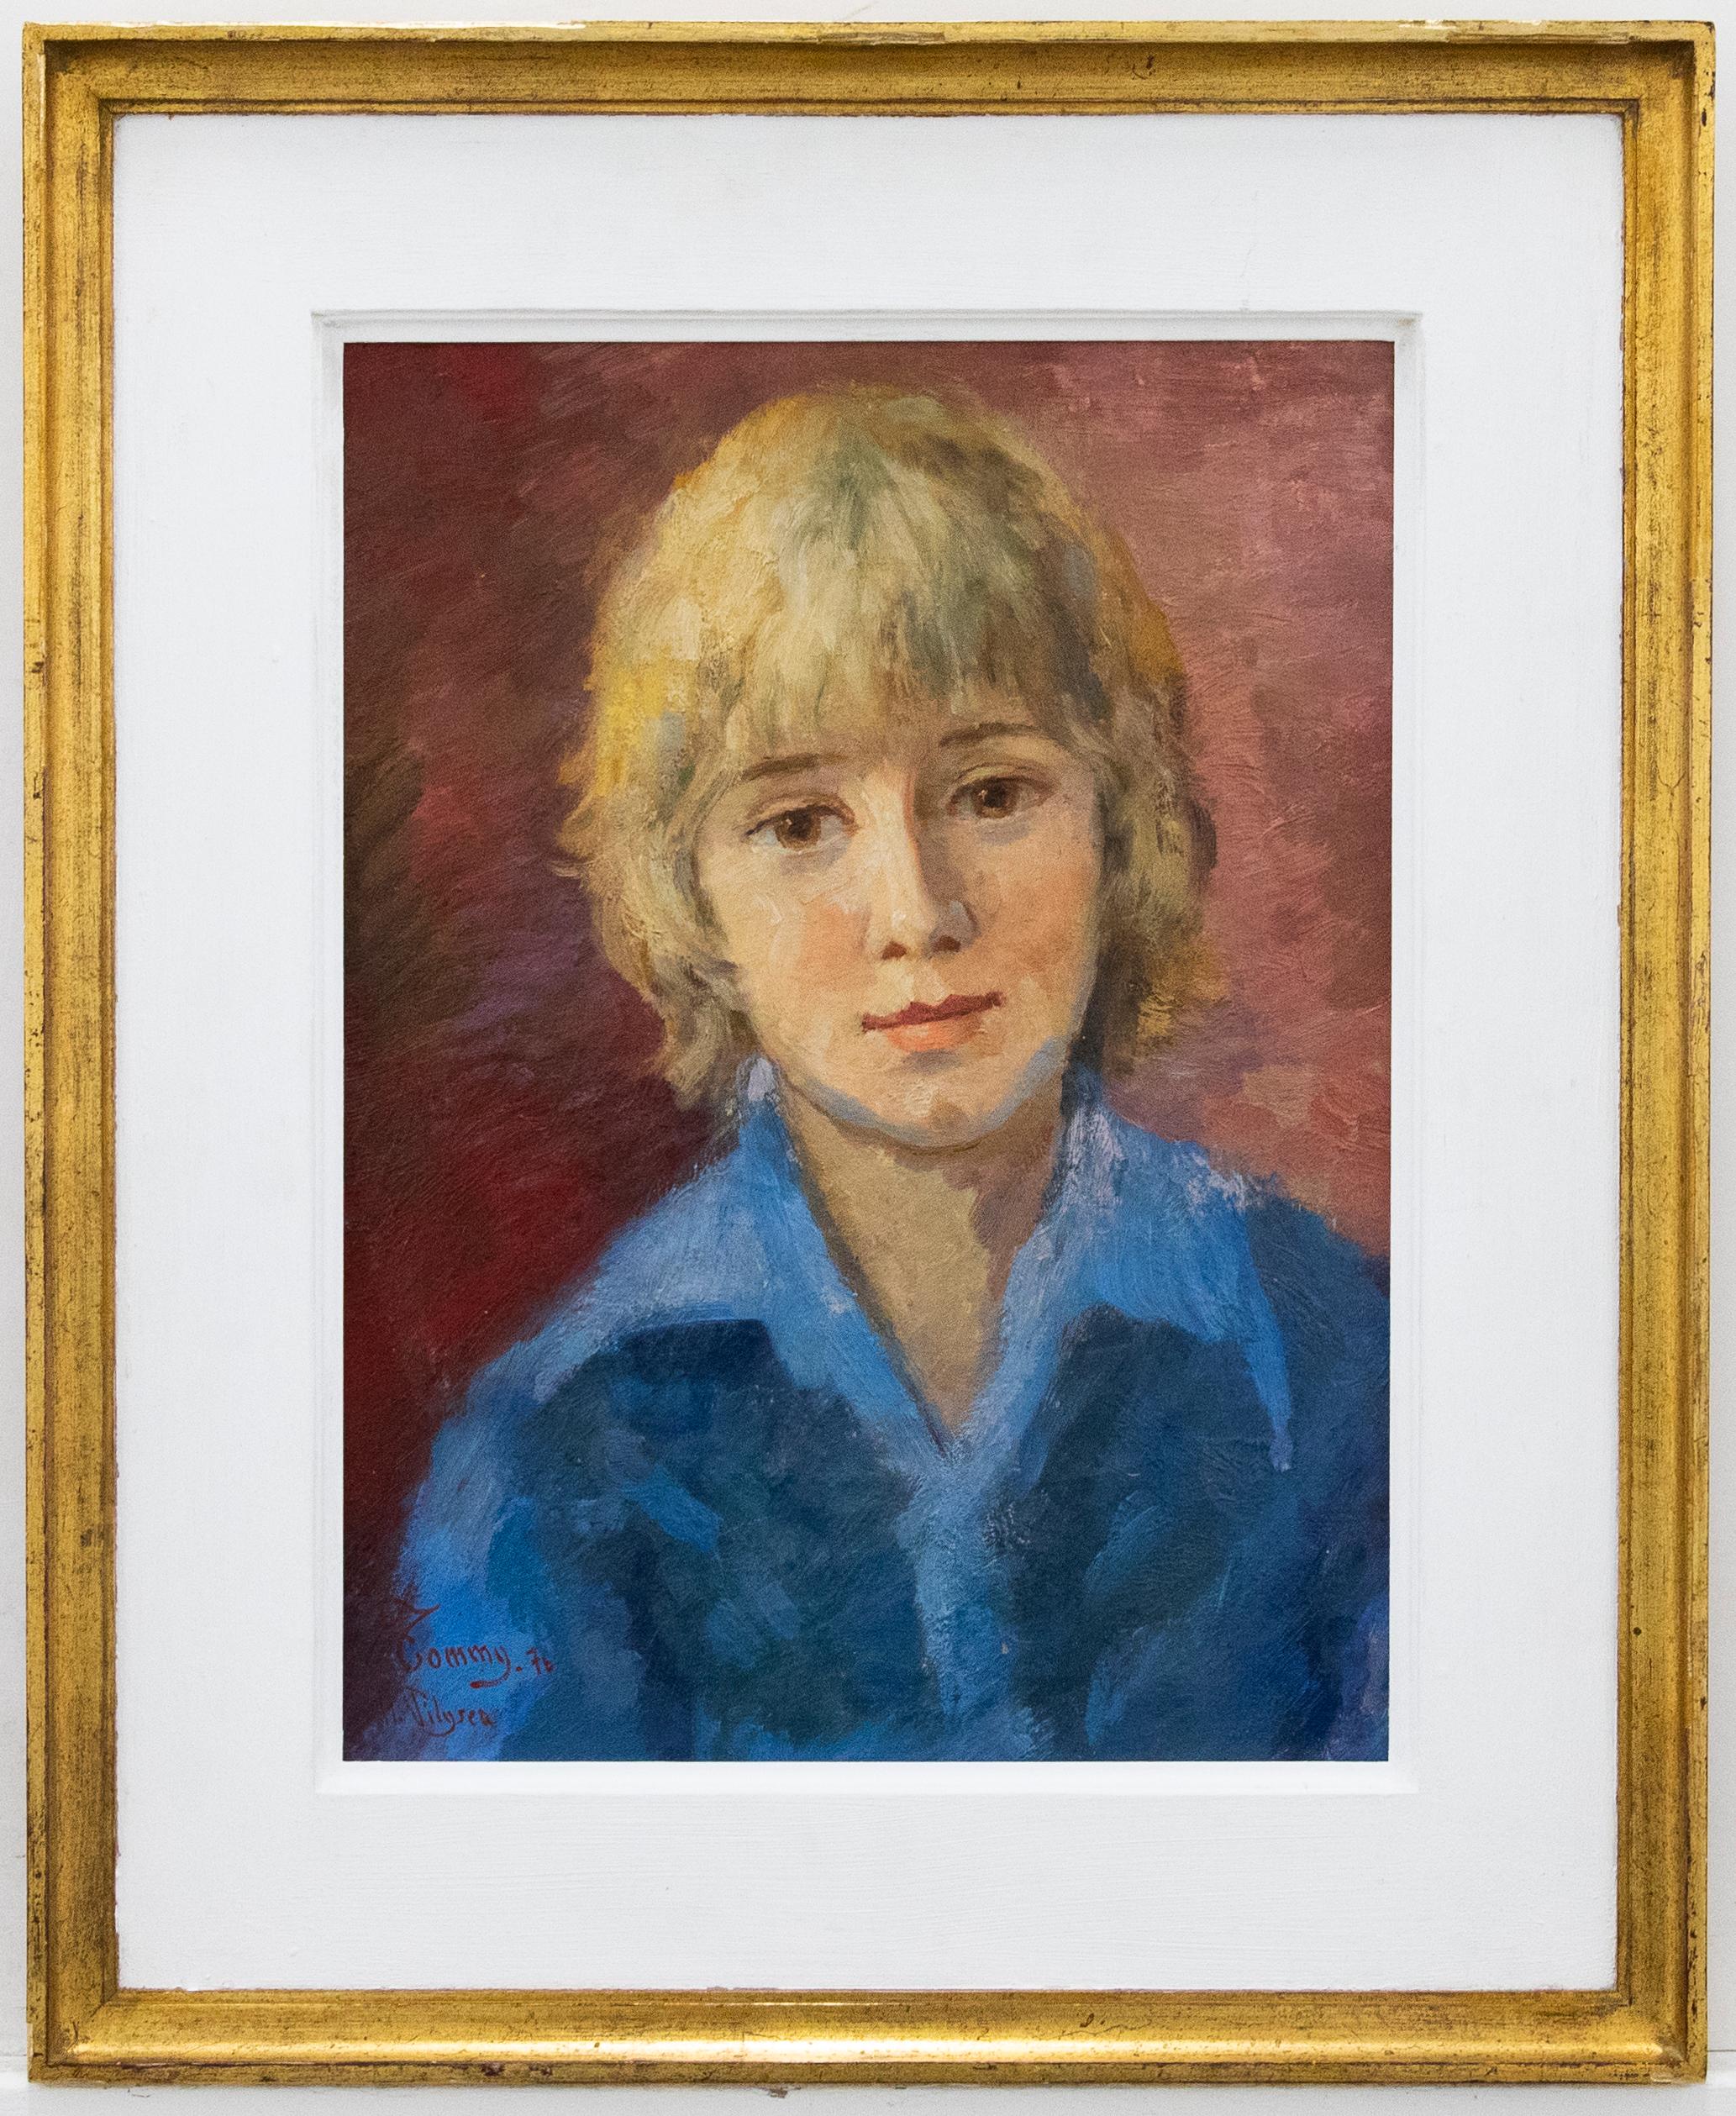 A delightful mid-century portrait of a young boy set against a red backdrop. The expressive portrait is well presented in a vintage gilt frame with painted slip. Signed, dated and inscribed to the lower left. On canvas on stretchers. 